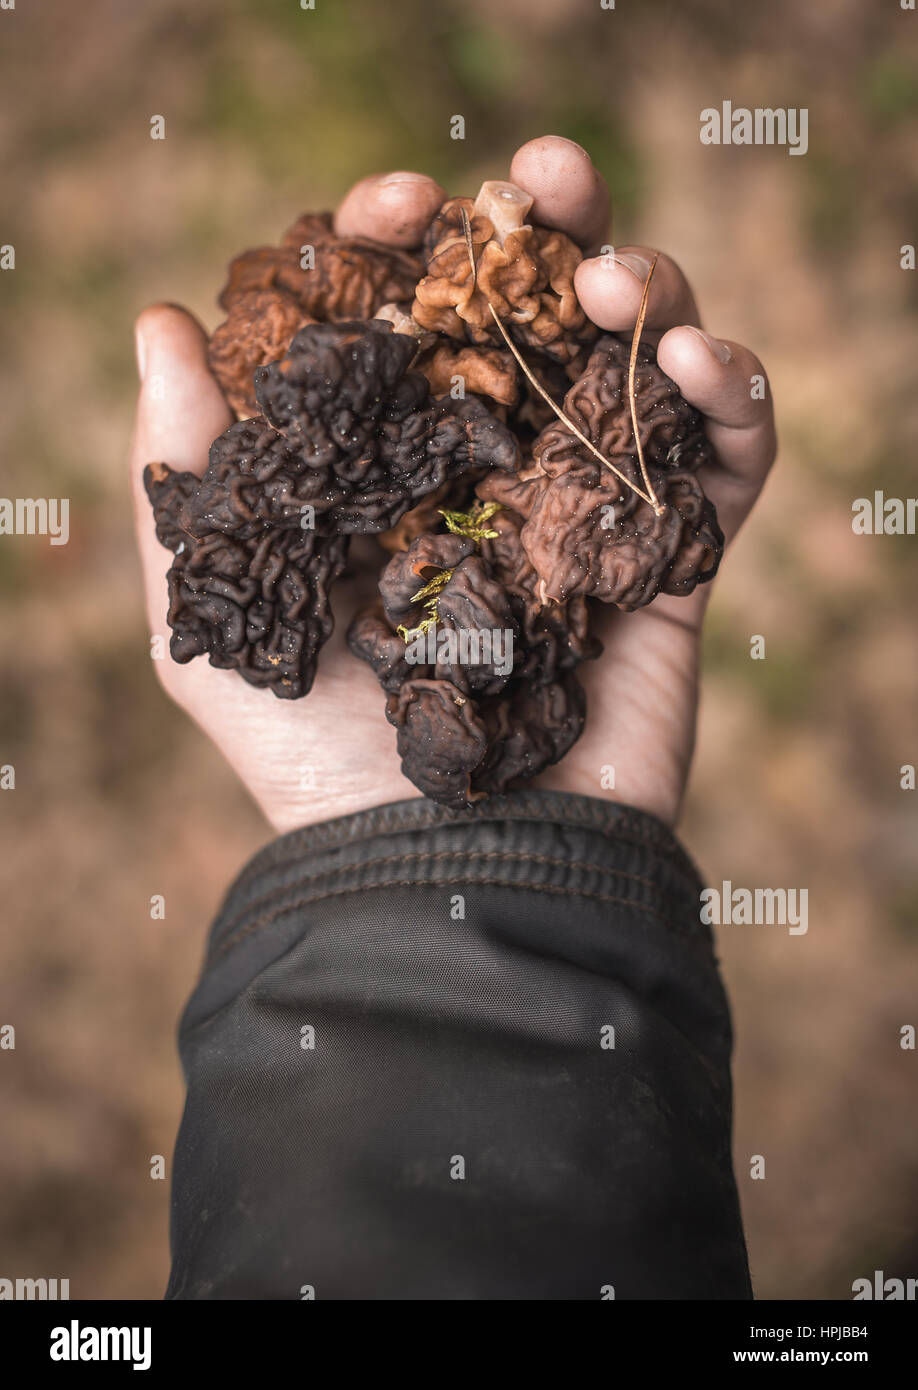 Gyromitra esculenta or false morel mushrooms in hand. Poisonous when raw but can be eaten if prepared correctly. Shallow depth of field Stock Photo